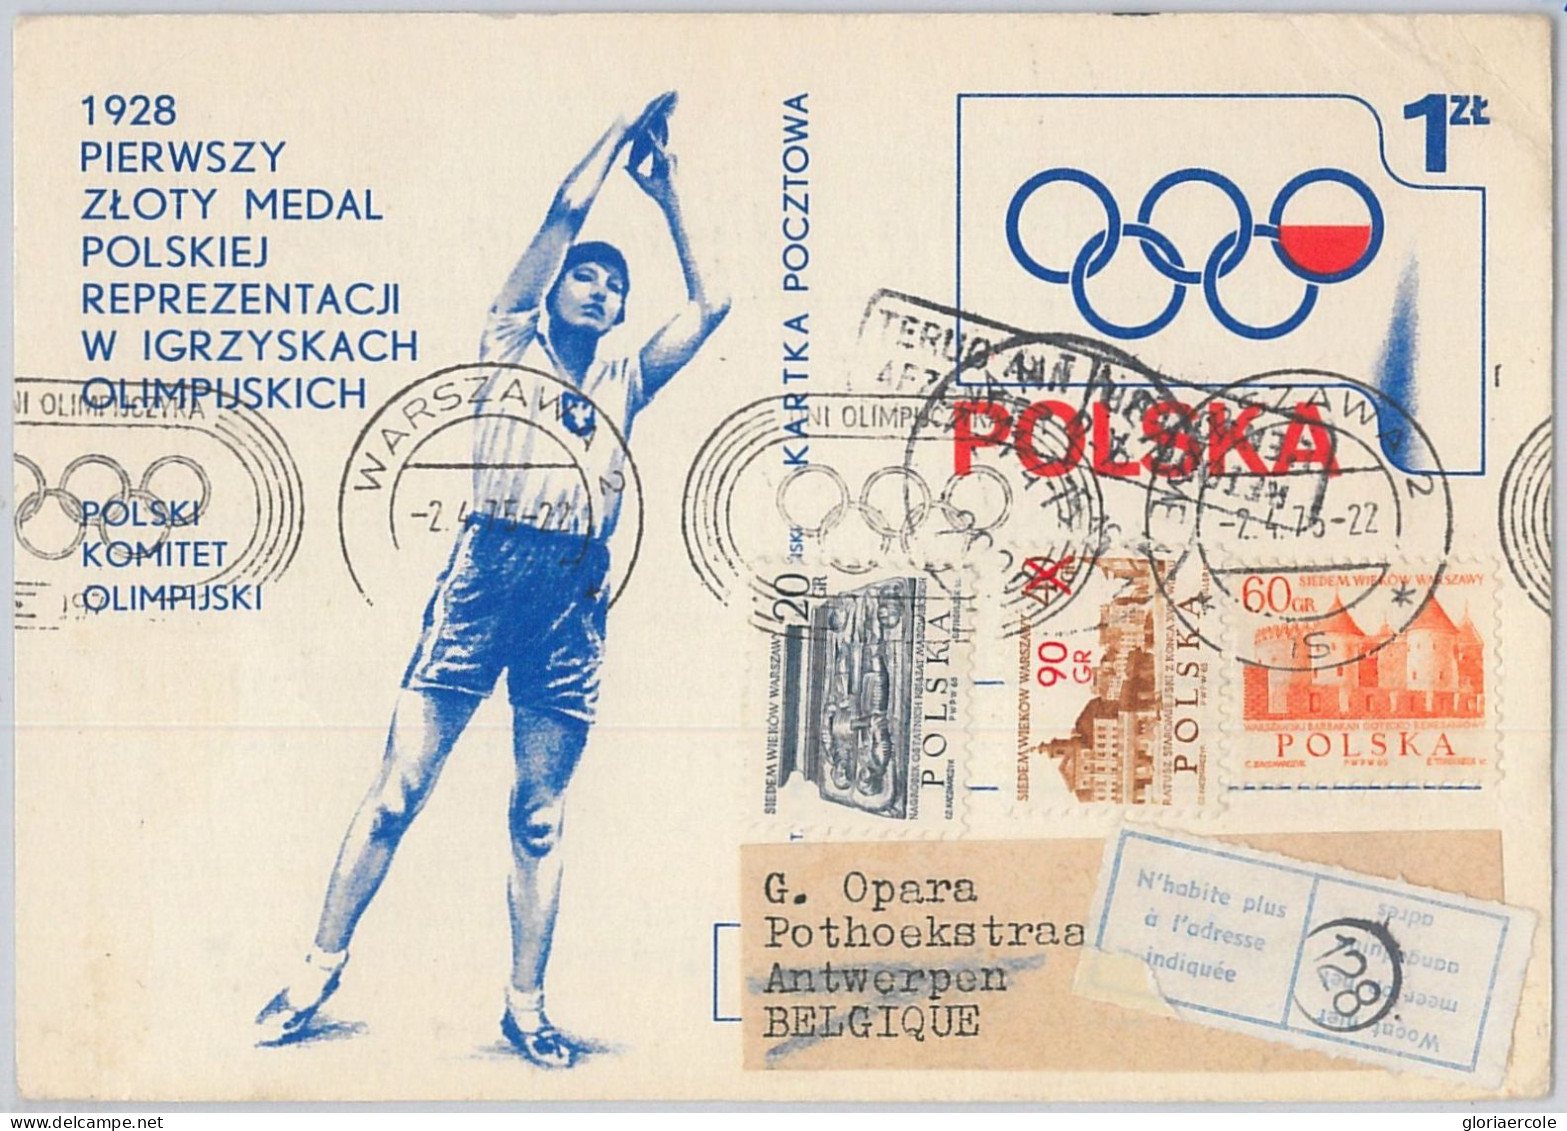 51131 - POLAND - POSTAL HISTORY -  STATIONERY 1978 OLYMPIC Games Disk Throwing - Summer 1928: Amsterdam